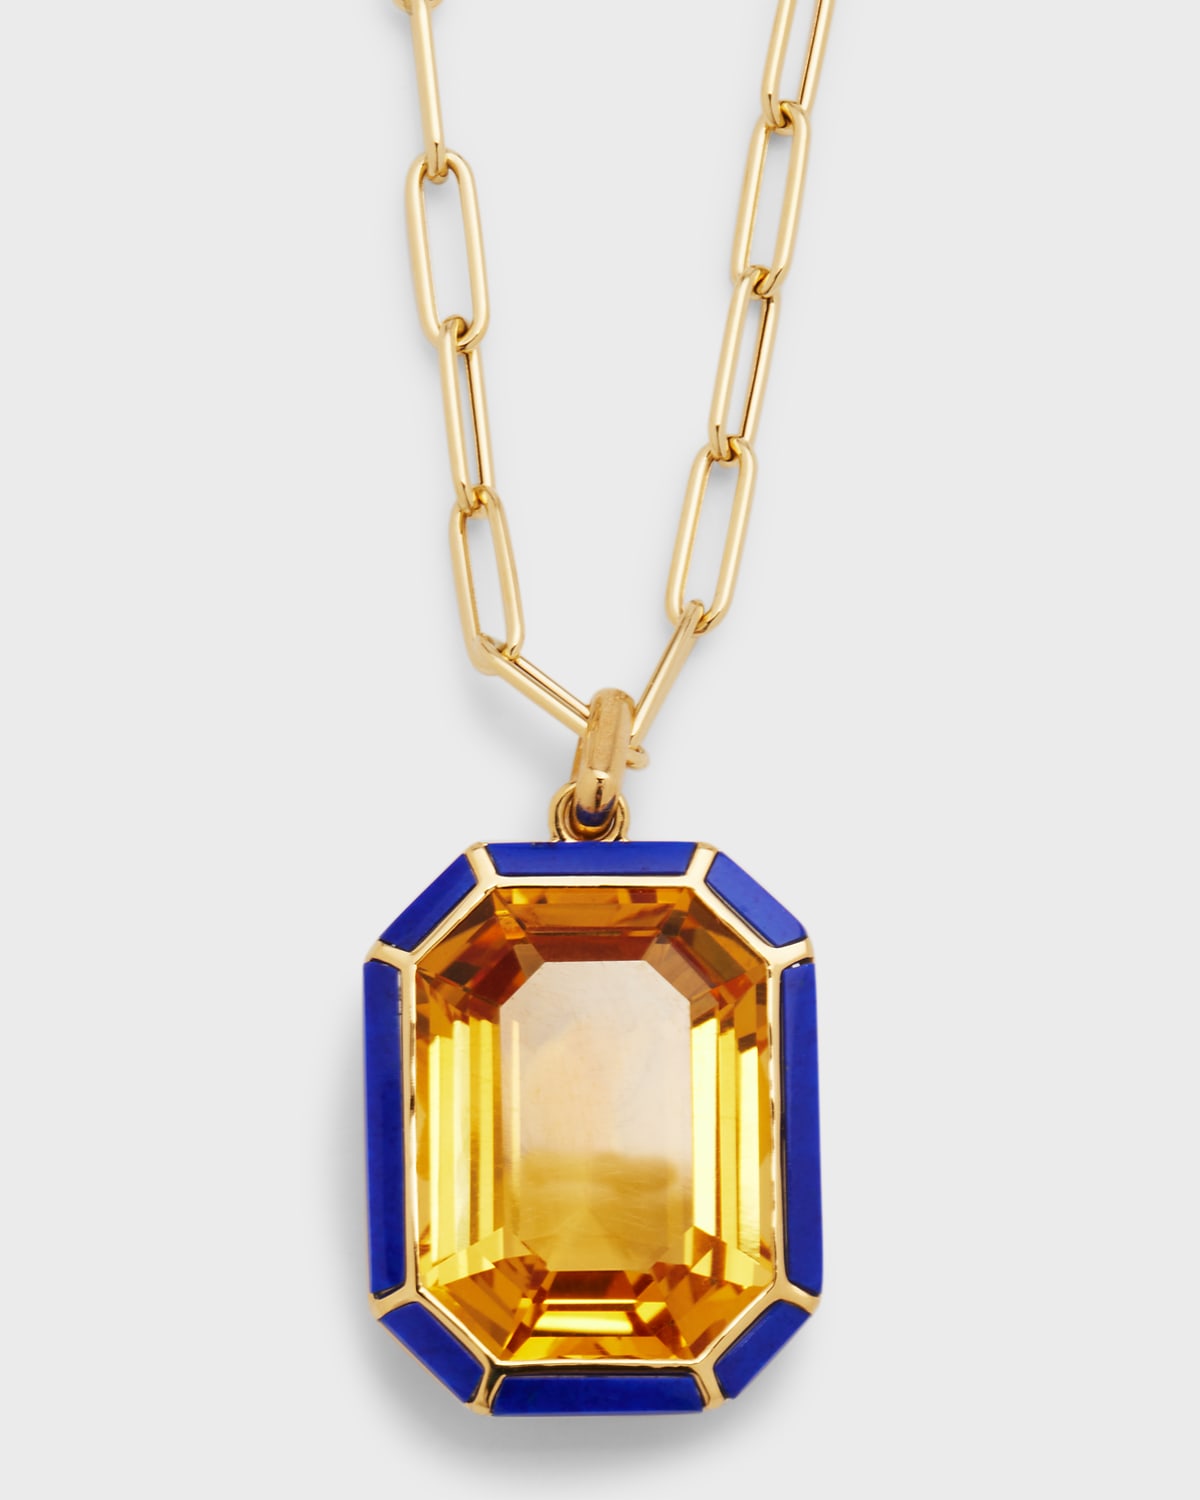 Goshwara 18k Gold Paperclip Chain Necklace with Emerald-Cut Citrine Pendant